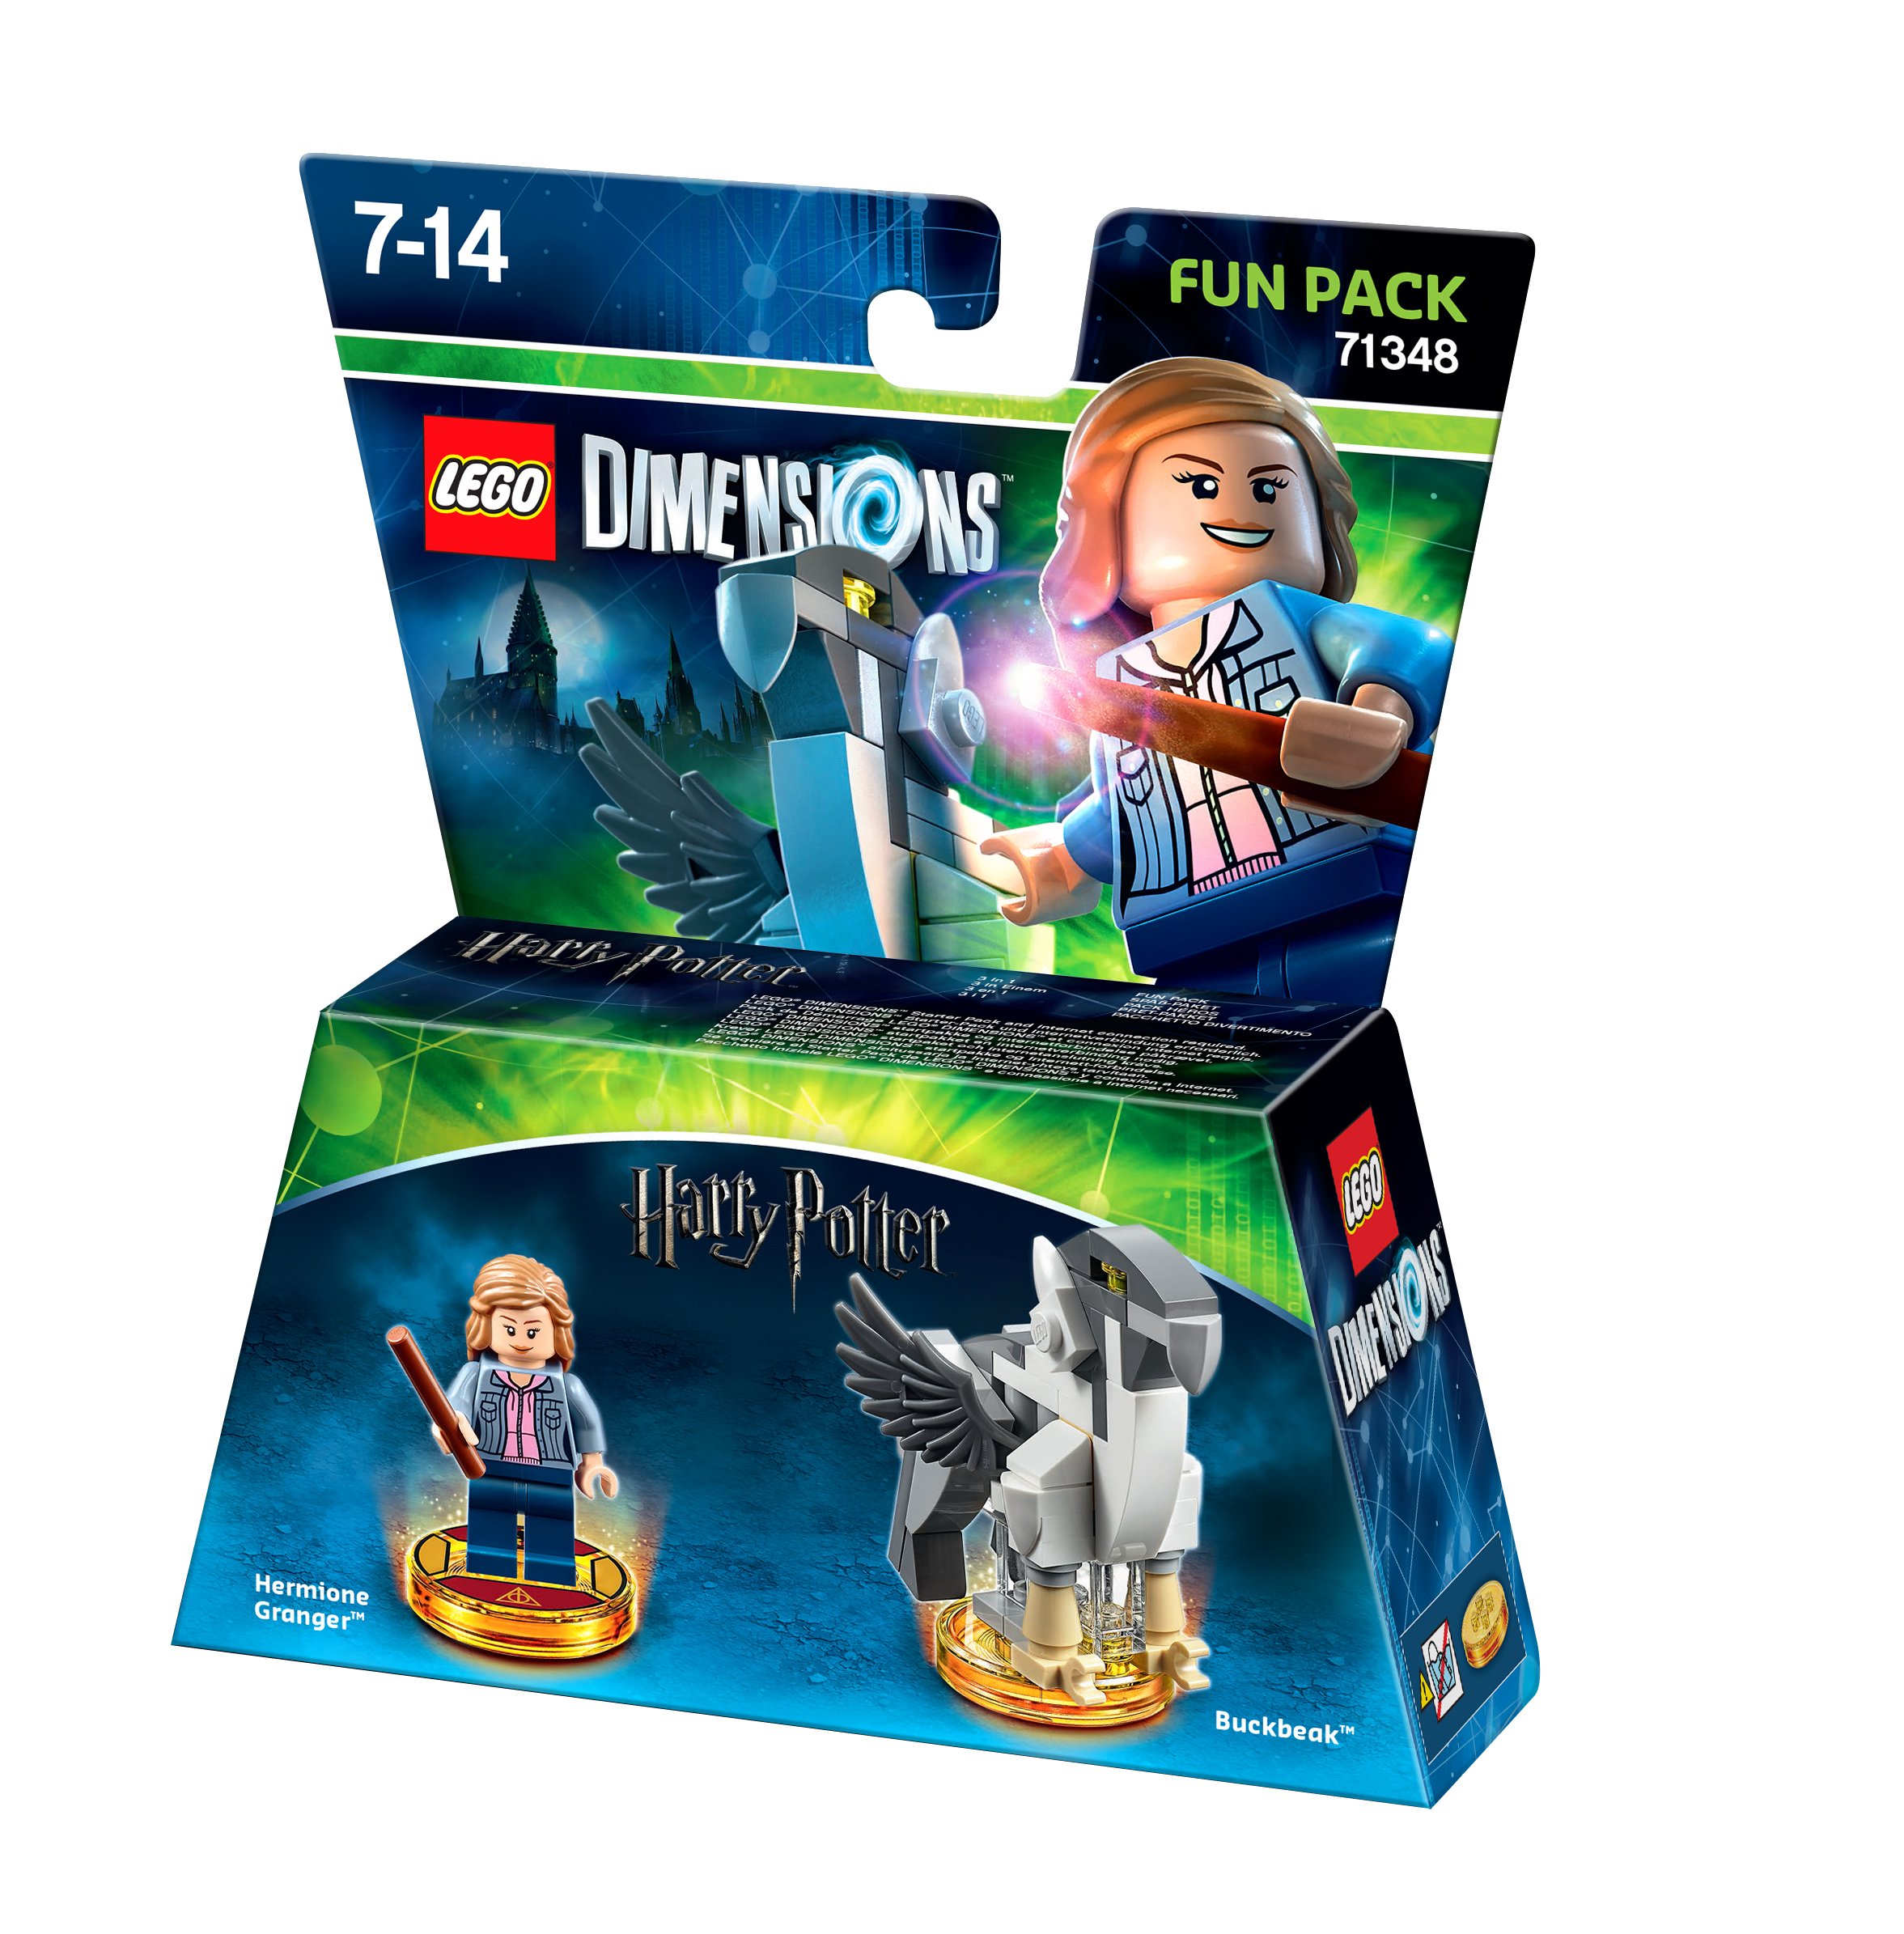 buy-lego-dimensions-fun-pack-harry-potter-hermione